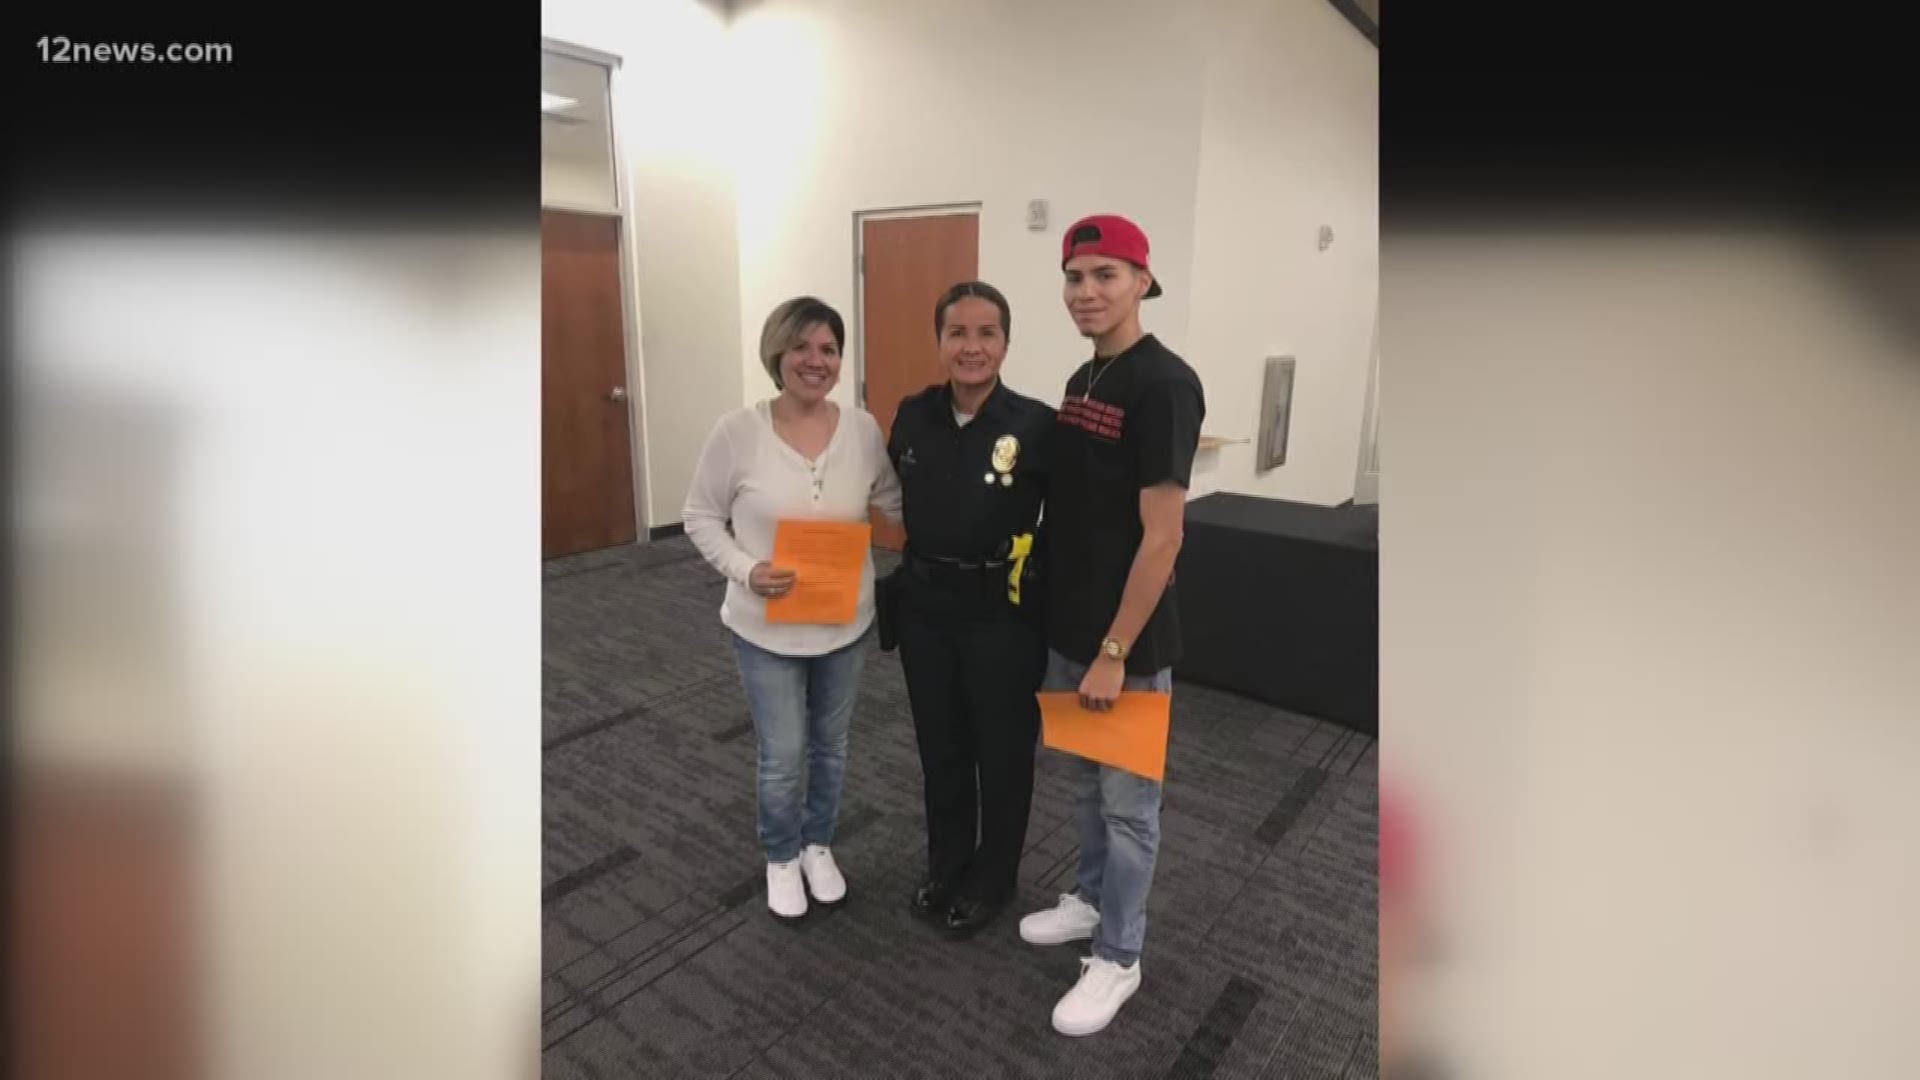 After failing the written exam two times, applicant Xavier Garcia was ready to call it quits. His mom, Tracy Contreras, took it upon herself to help her son study.